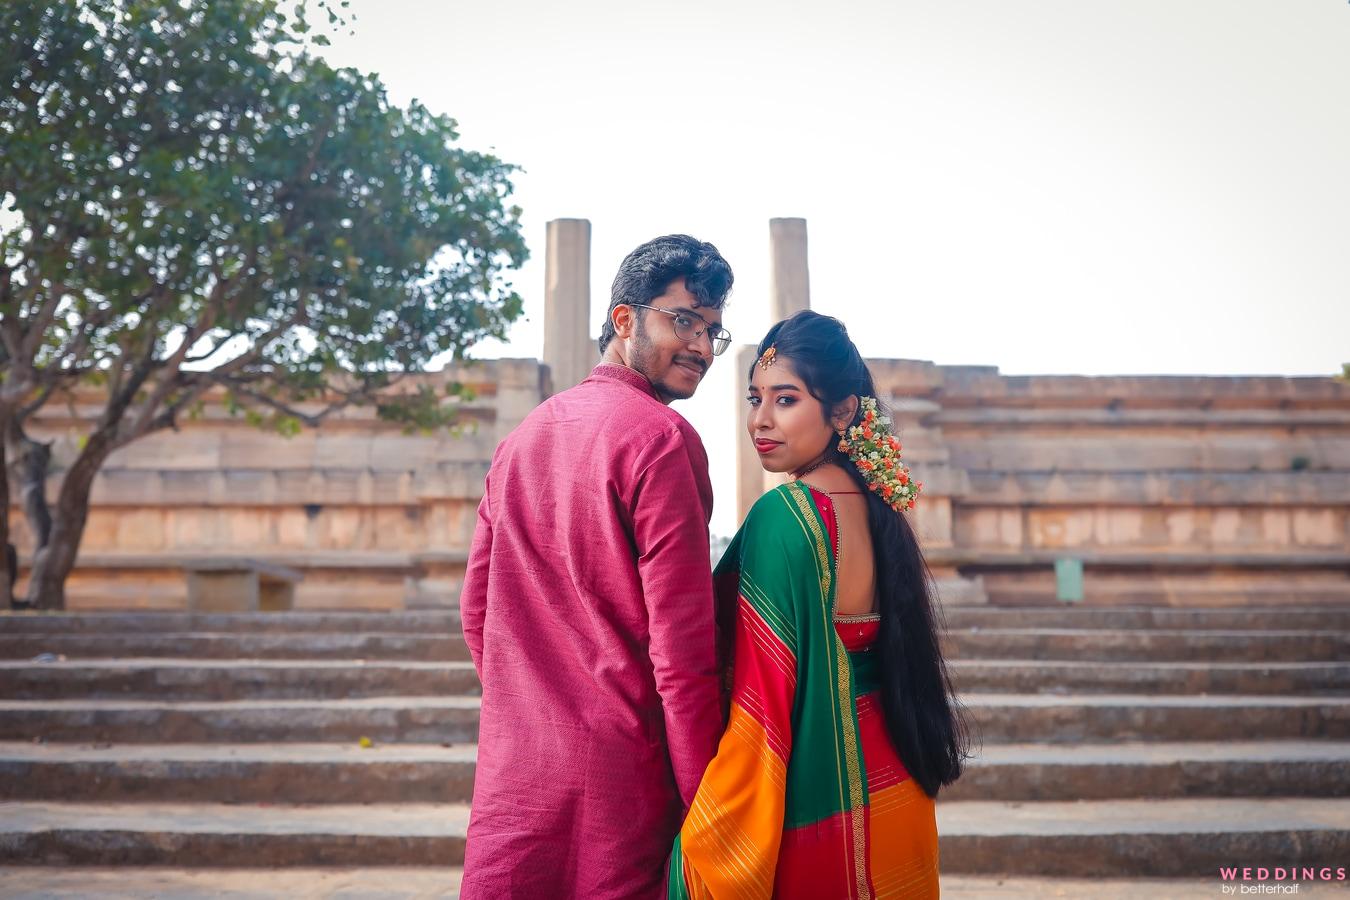 Lifestyle Couple Shoot at India Gate | Prateek & Sandy - Twogether Studios